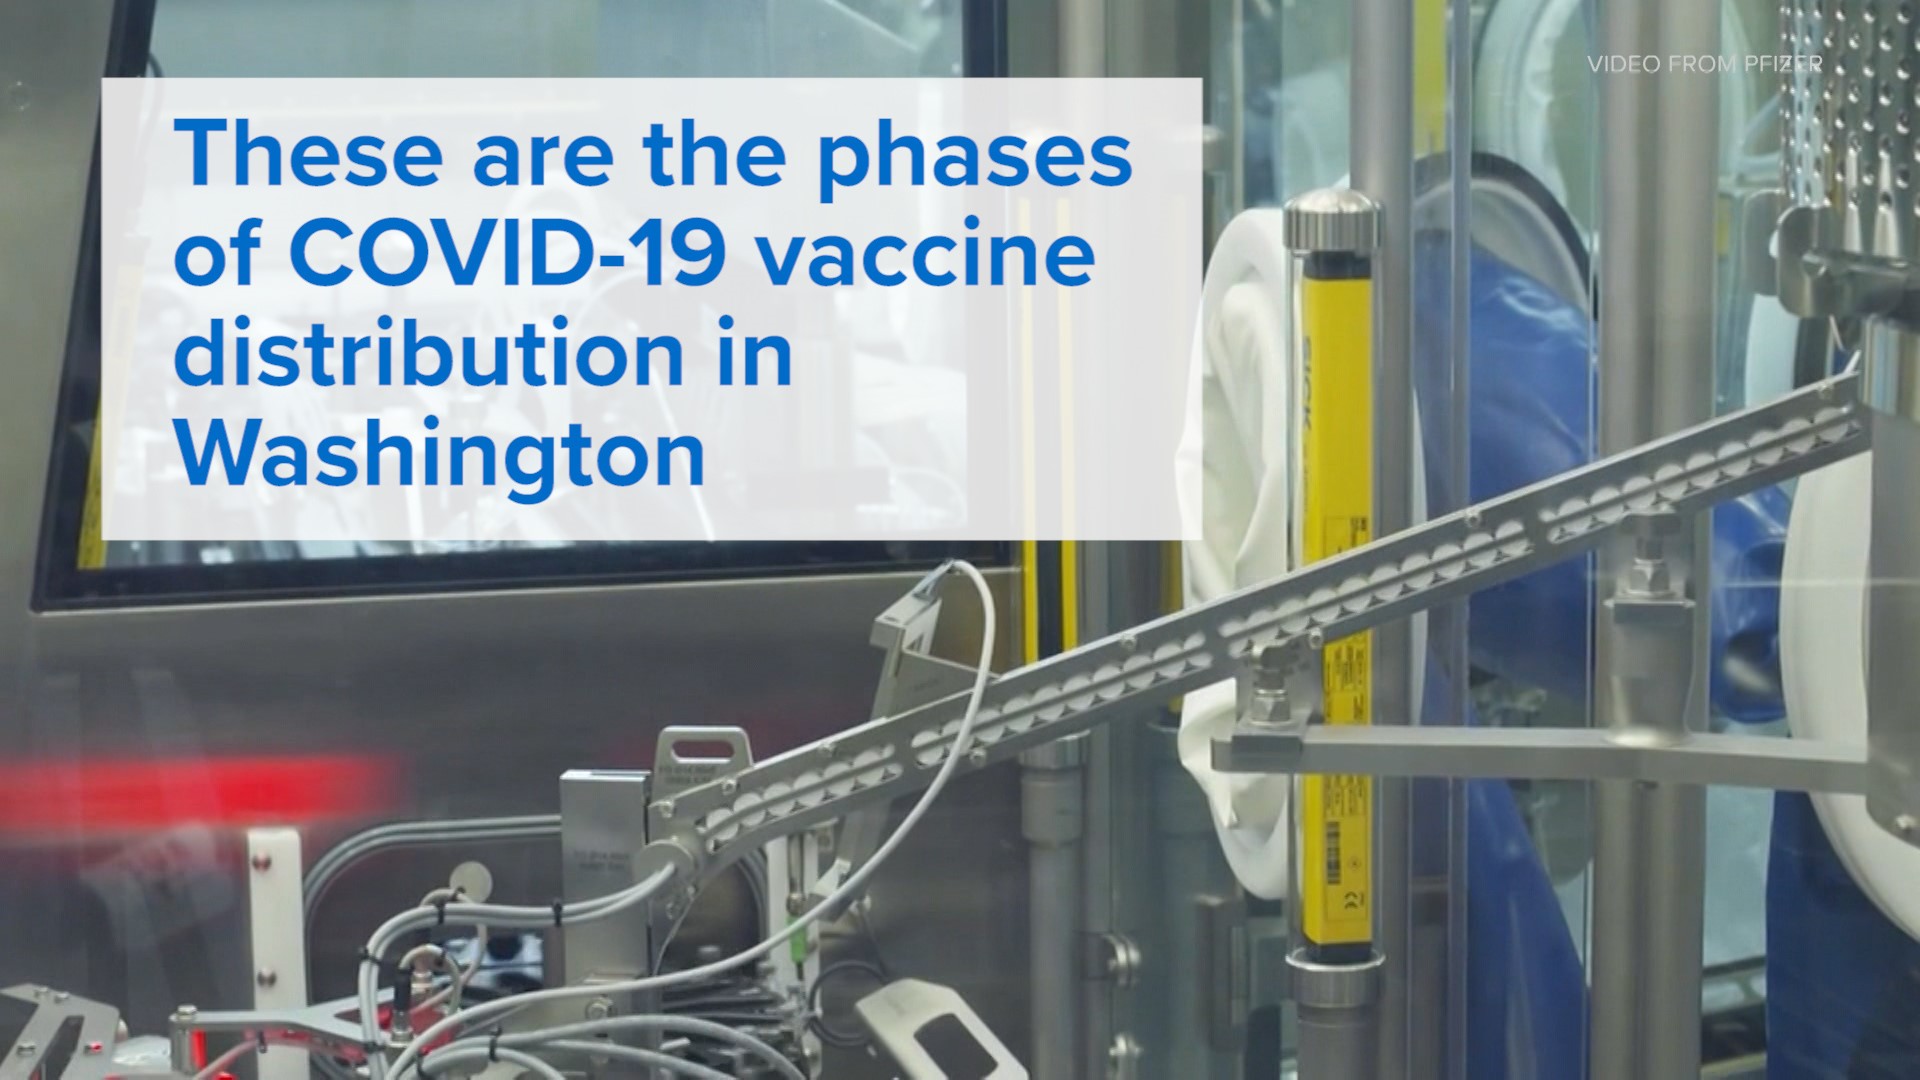 Washington's plan for vaccine distribution, updated March 5, 2021.